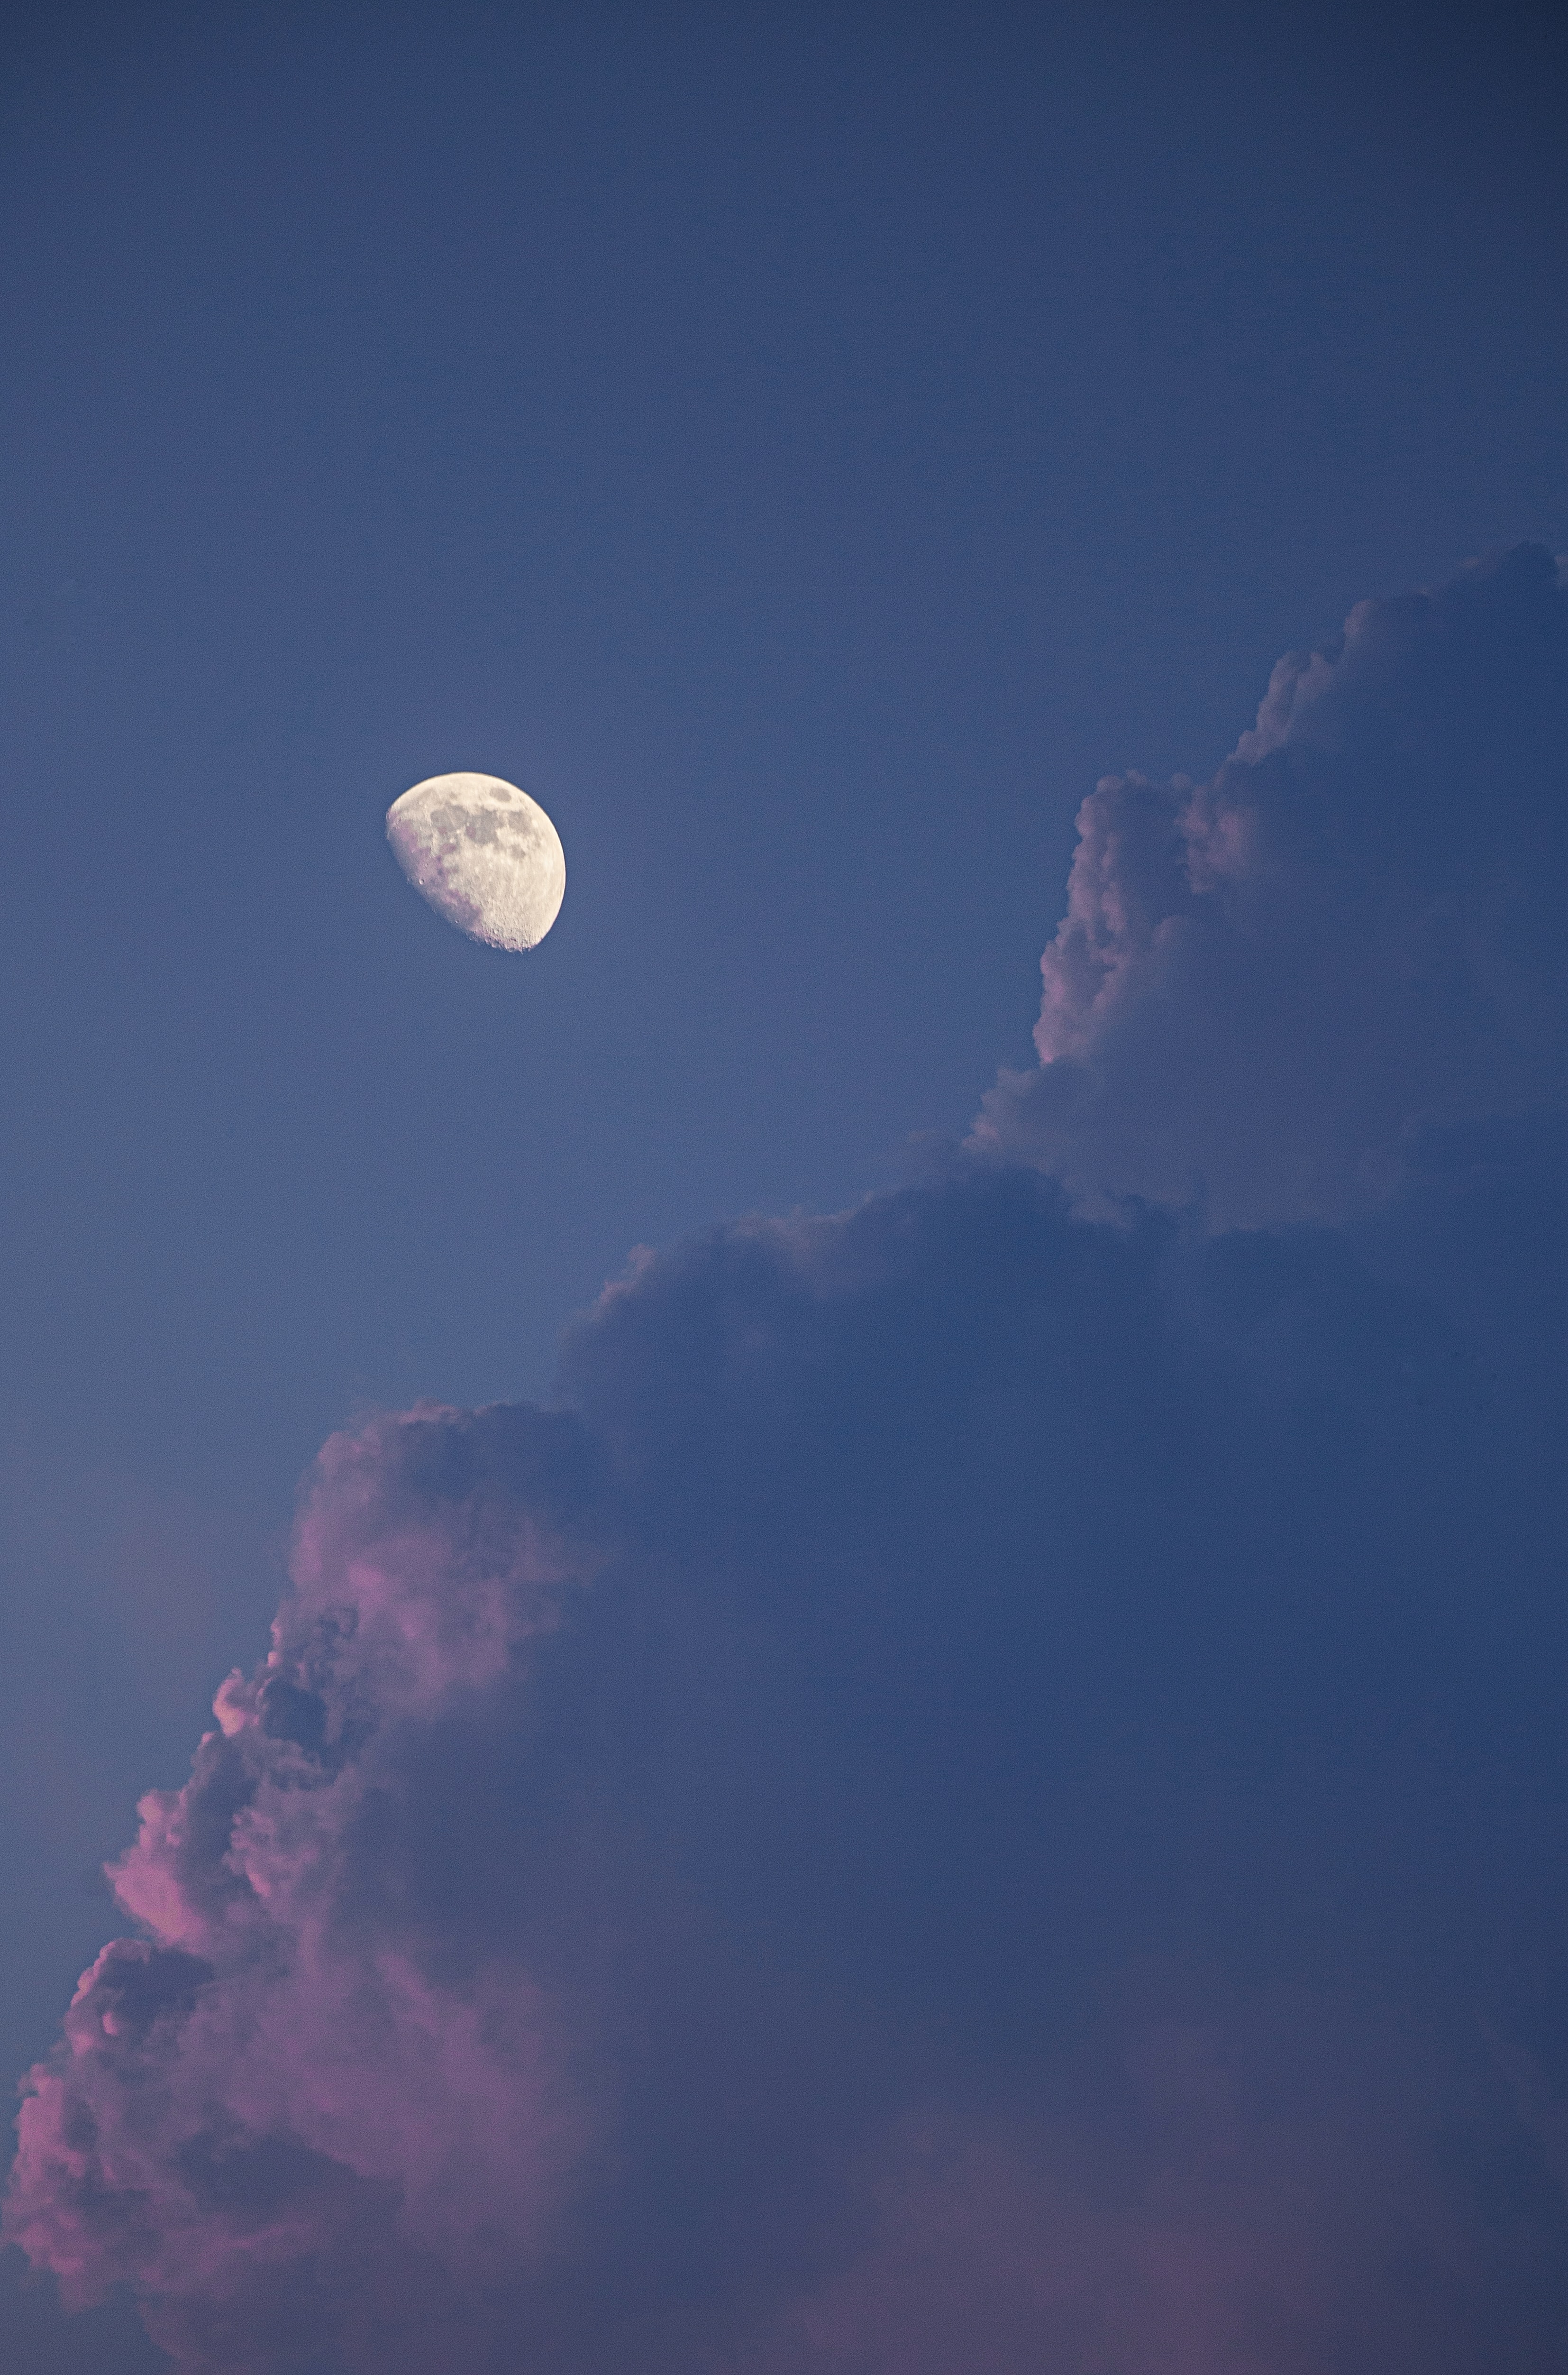 clouds, moon, nature, sky, full moon